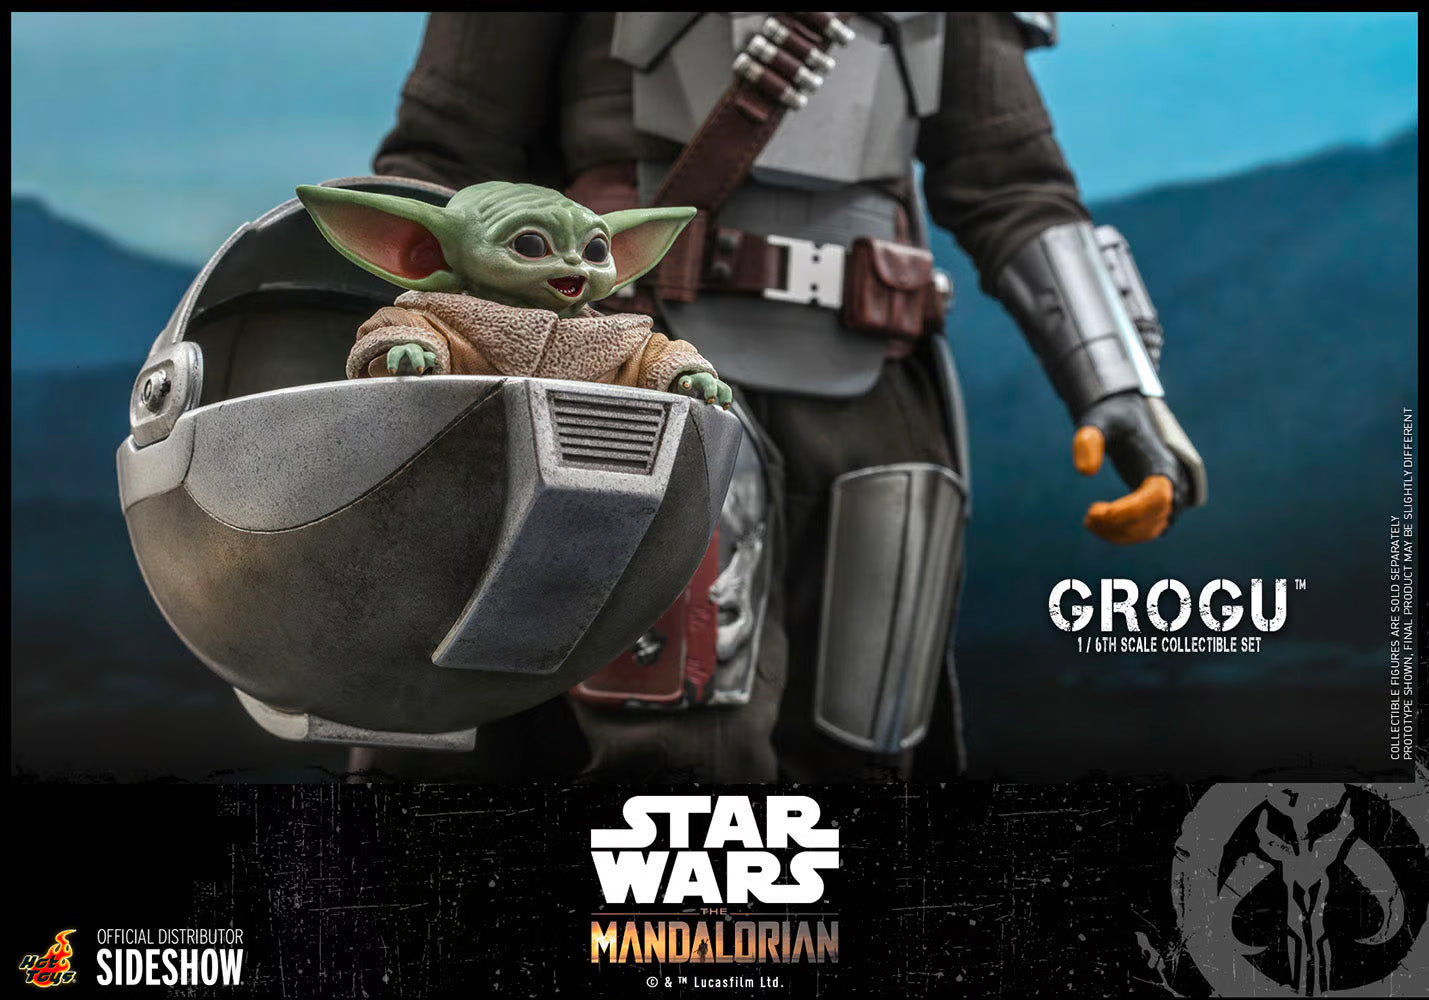 Hot Toys x Sideshow Collectibles: Star Wars - Grogu Sixth Scale